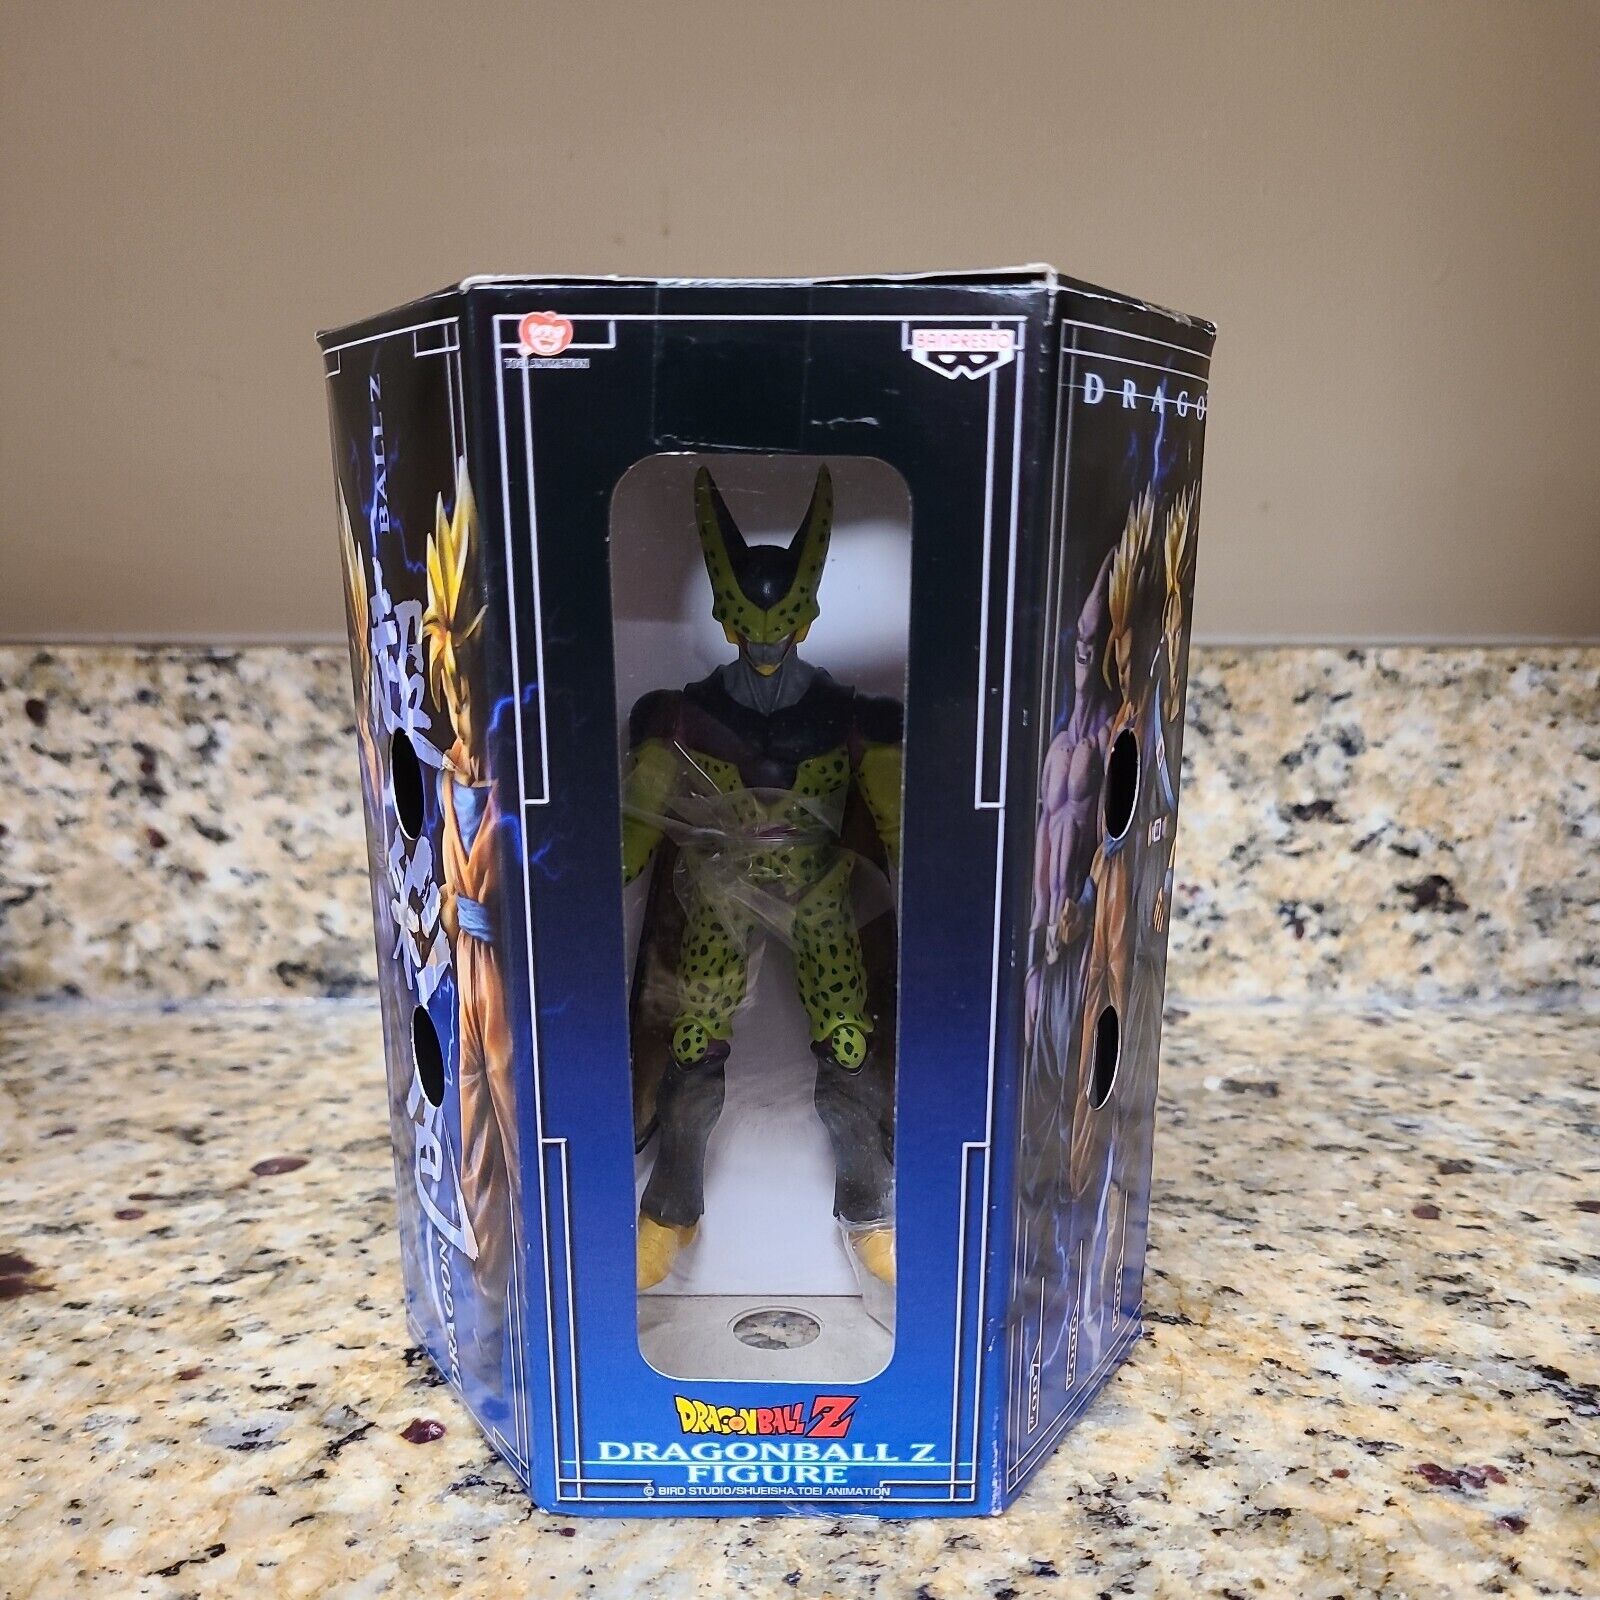 RARE Dragon Ball Z Banpresto 5 inch Perfect Cell 008. New in Box Redemption Only